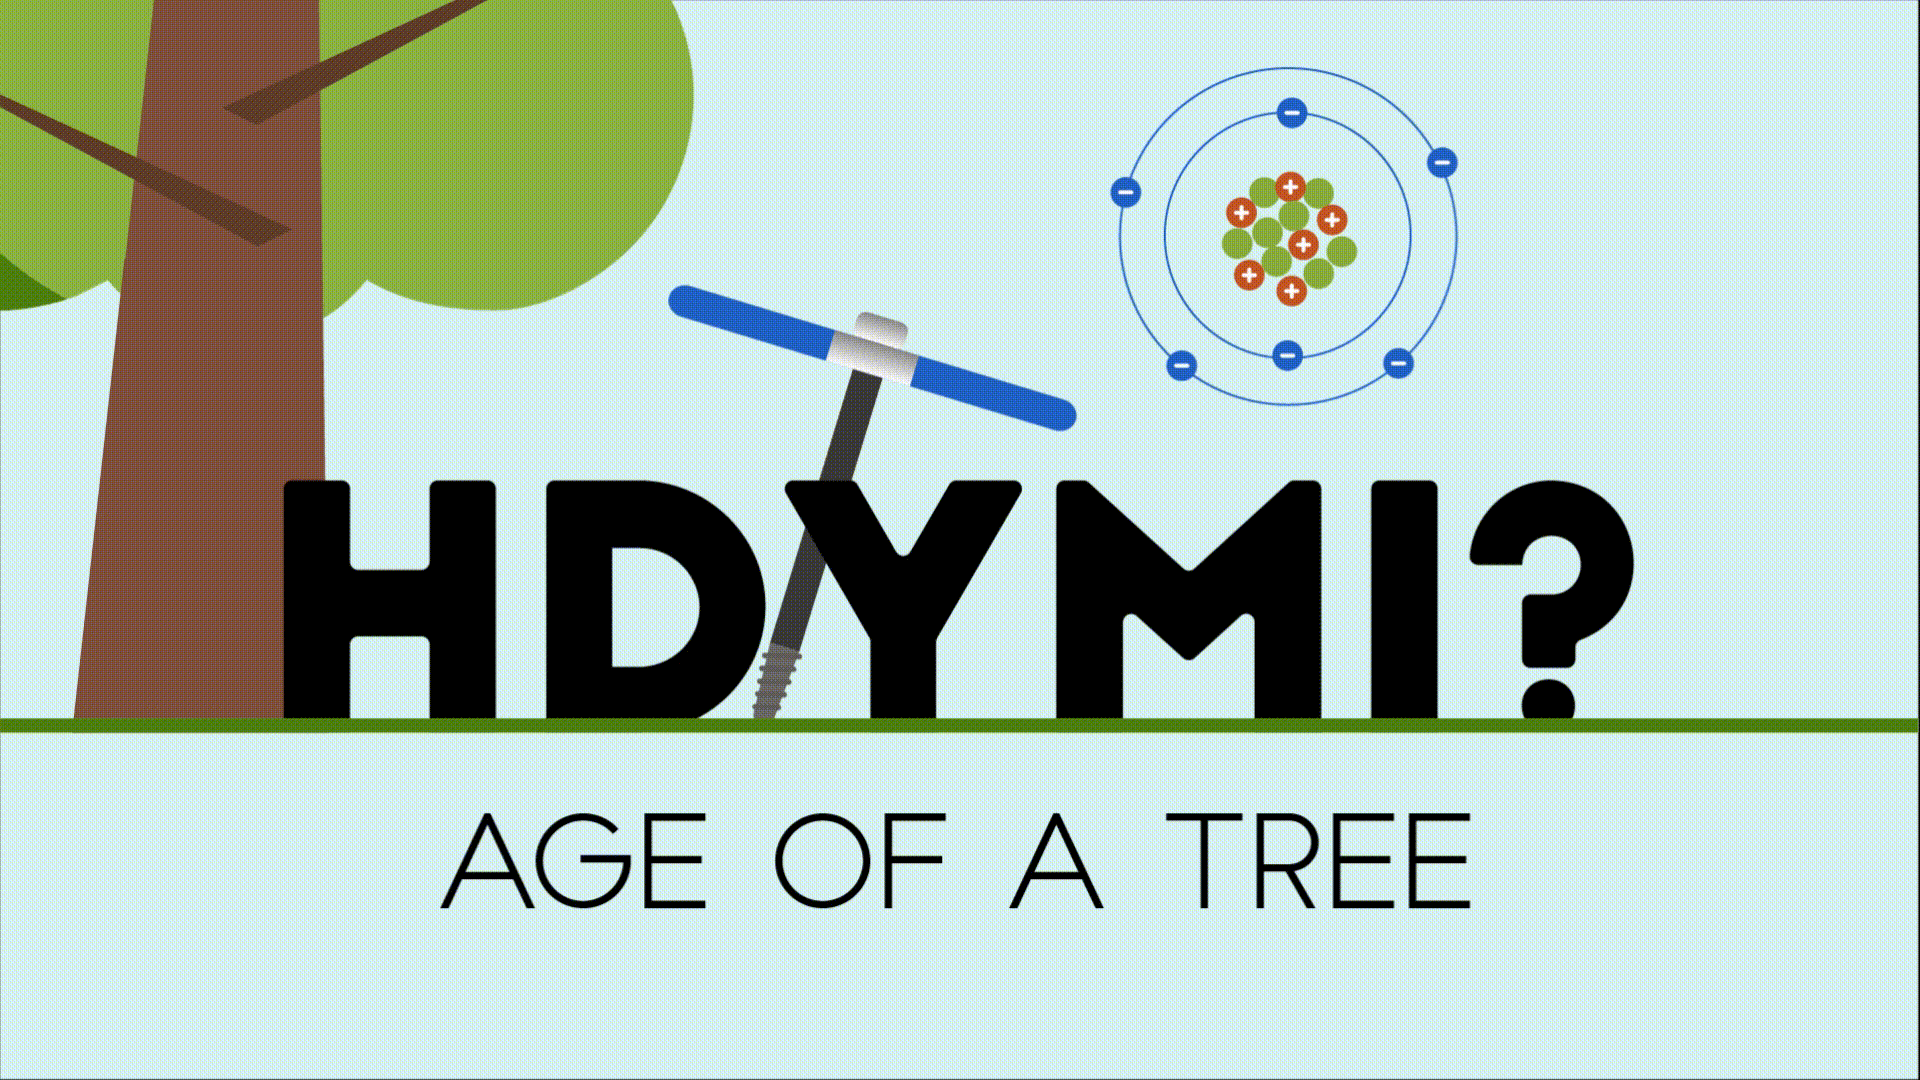 Animation shows a T-shaped coring tool going into a tree and a spinning atom and reads: HDYMI? Age of a Tree